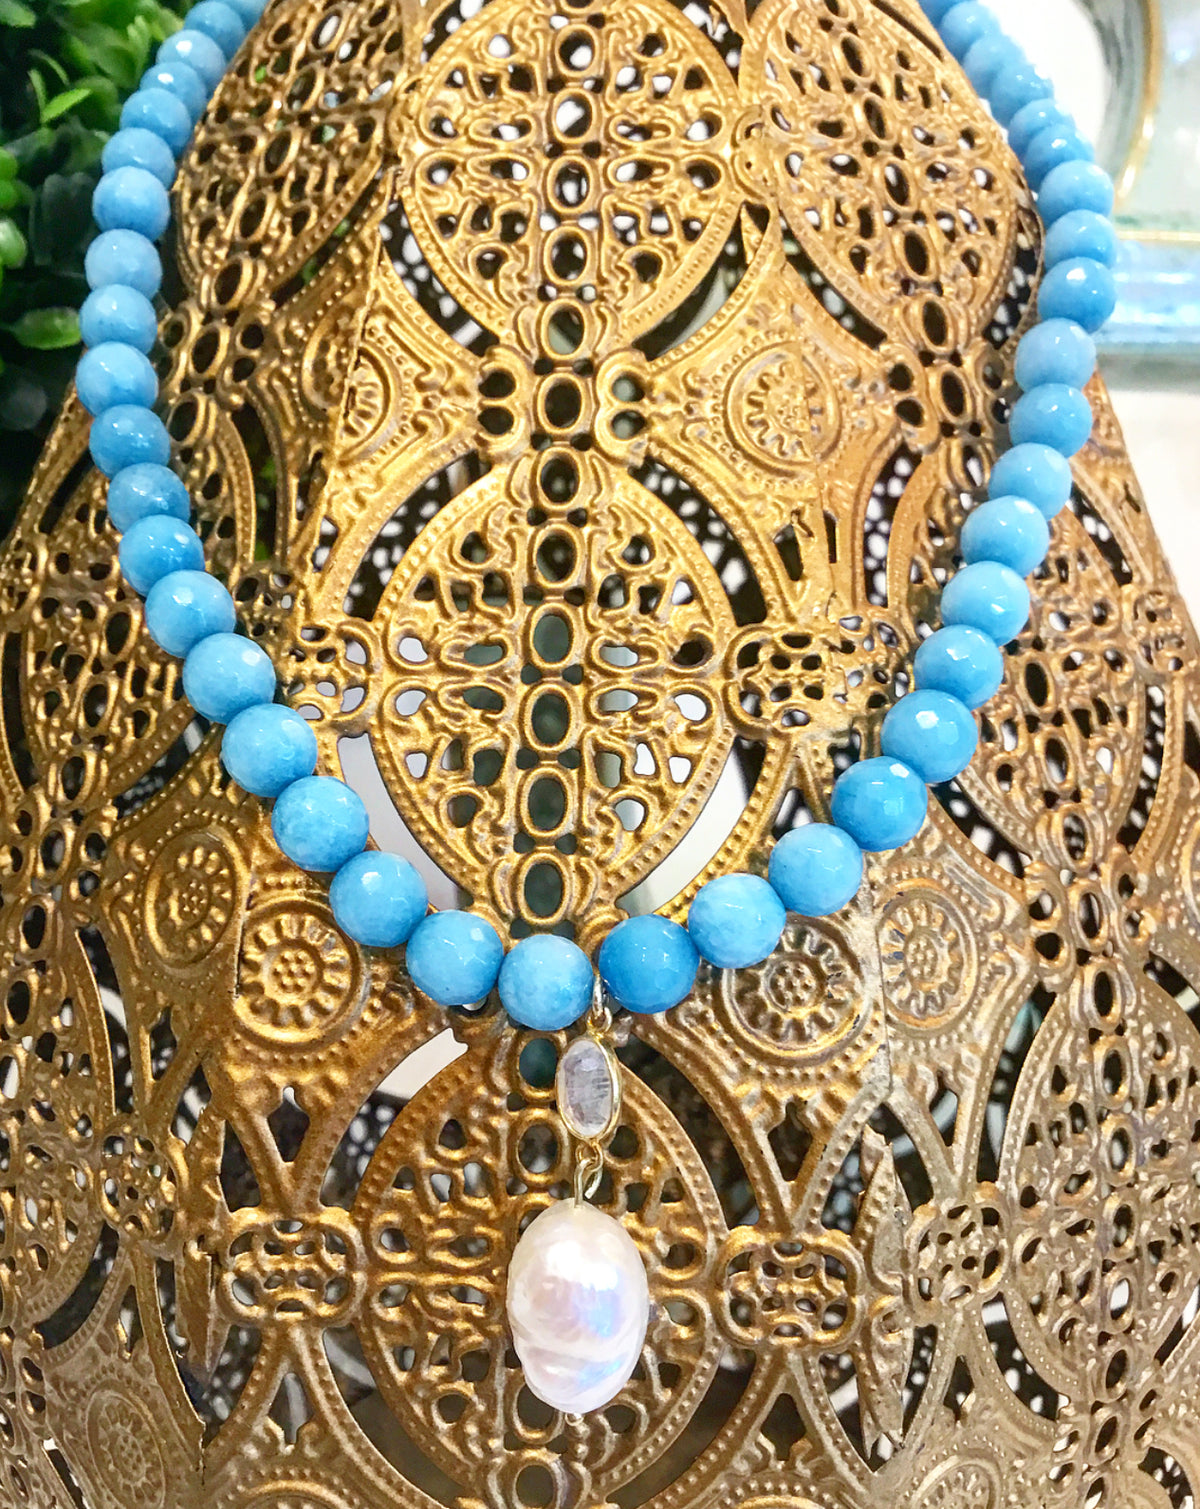 Saturday Stunner: The Gorgeous, New Teramasu Blue Faceted Jade Necklace With Baroque Pearl and Moonstone Pendant